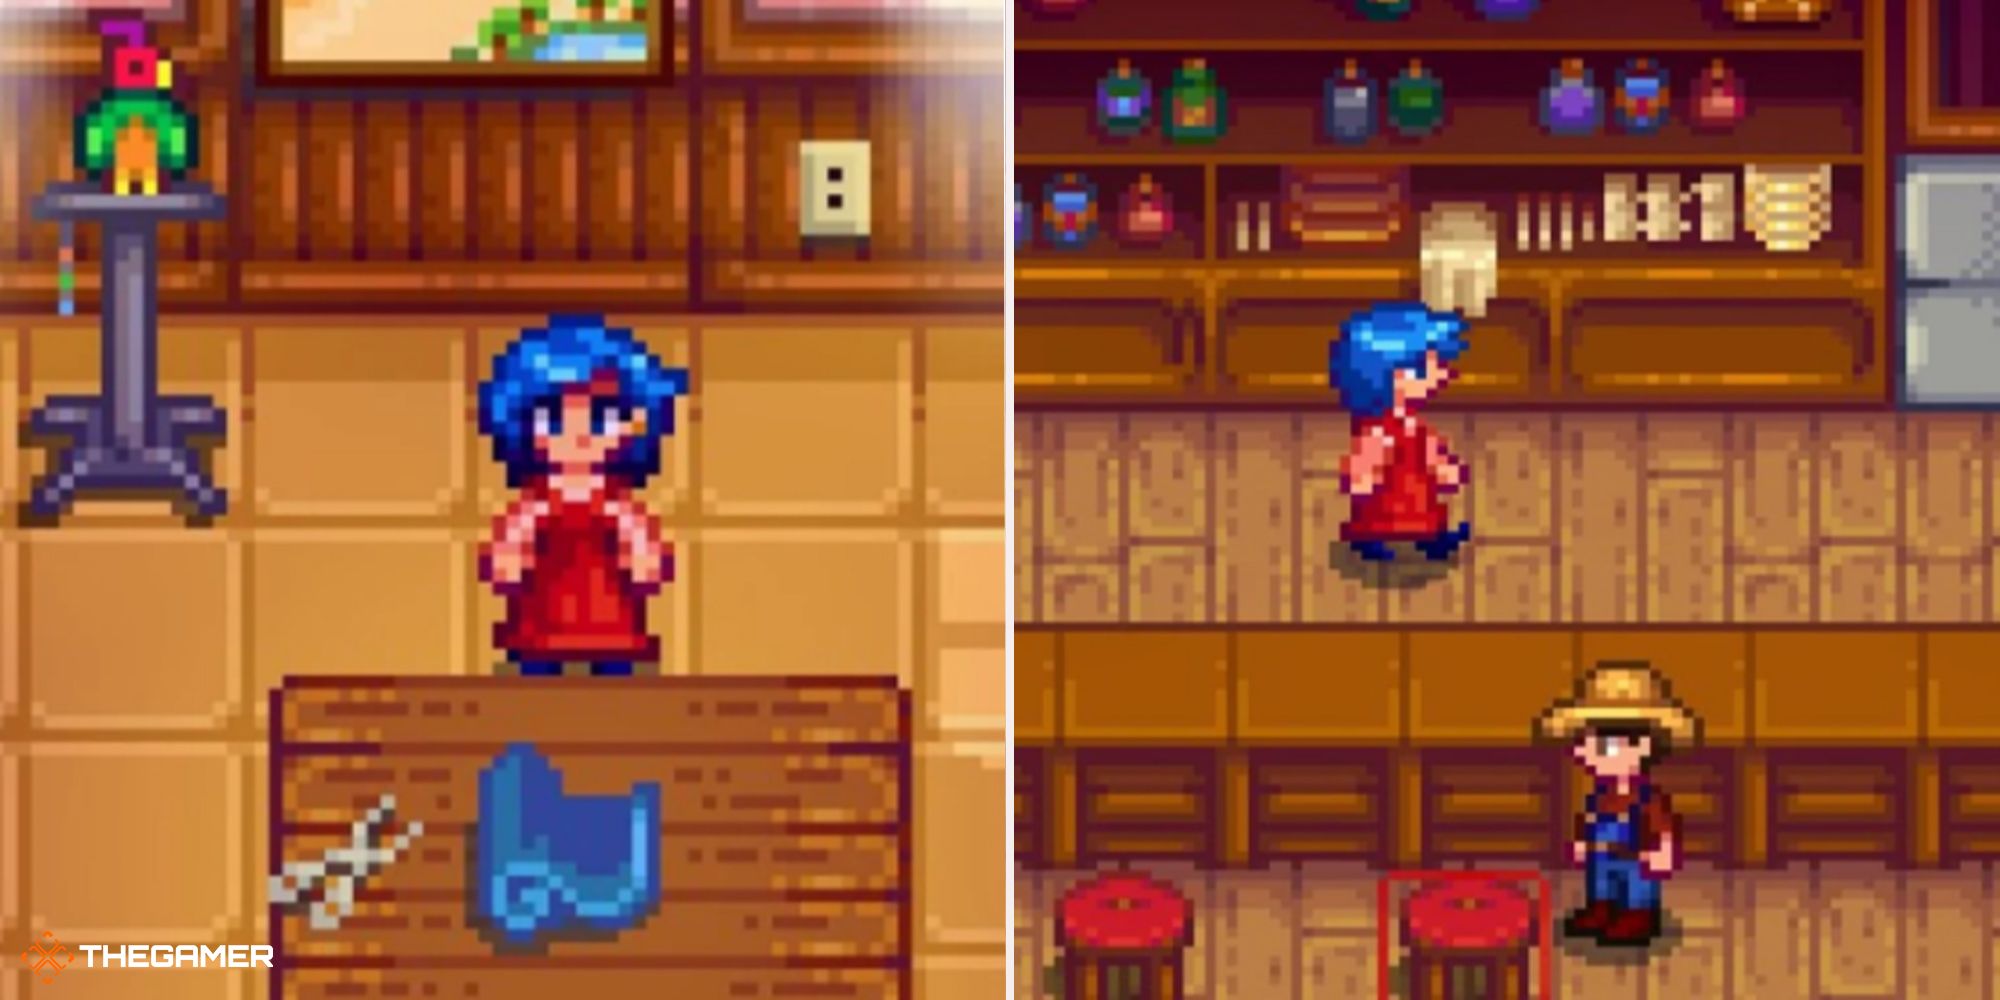 Stardew Valley - Emily at home (left), in the Saloon (right)